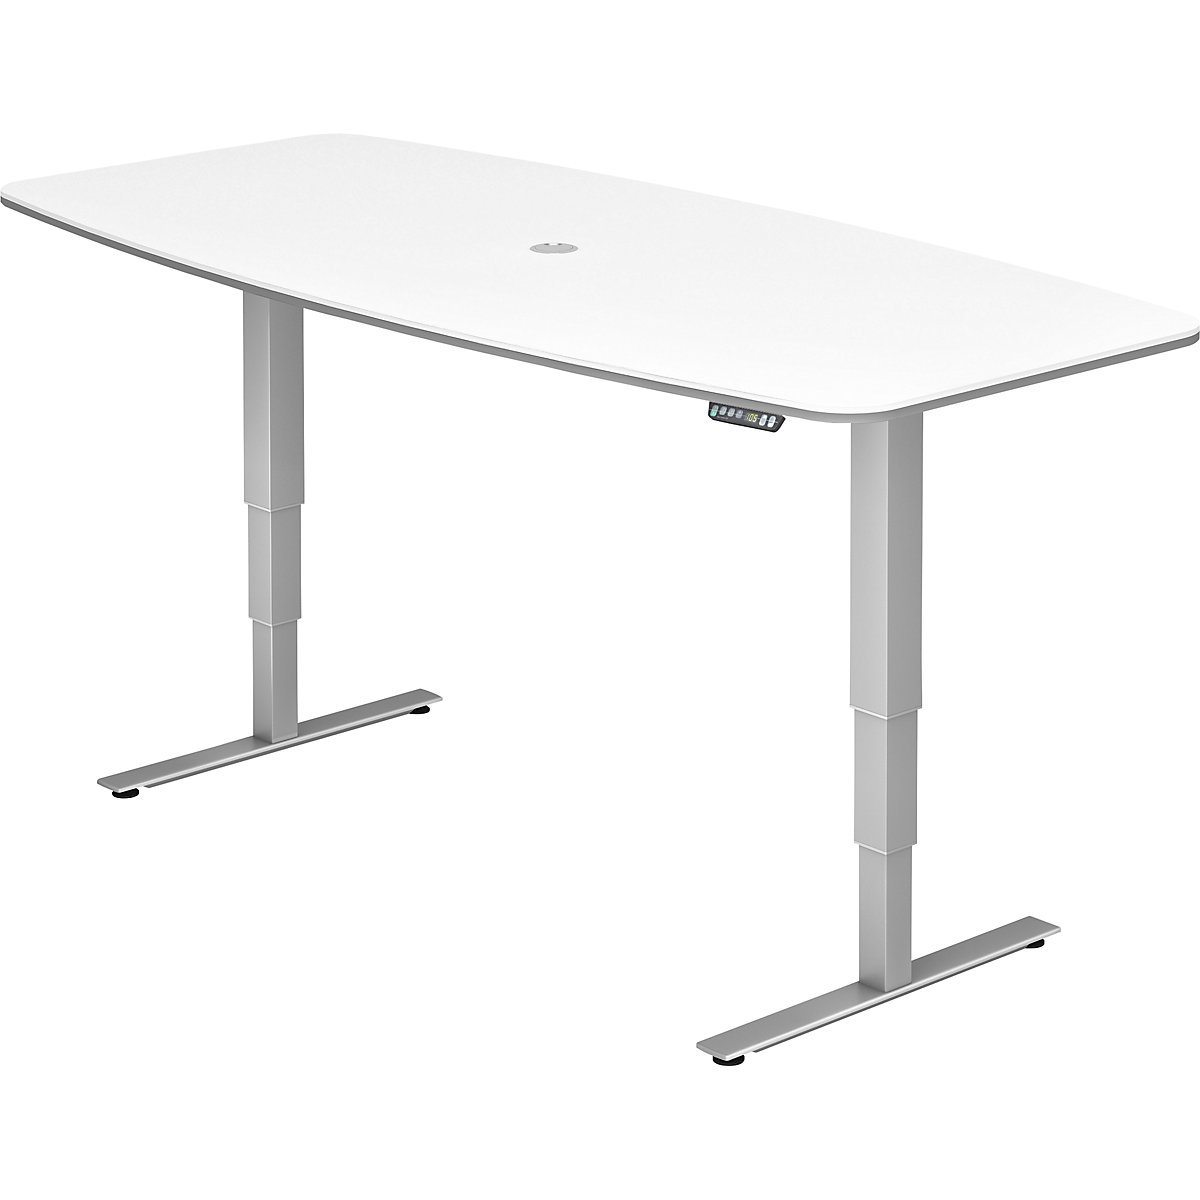 Conference table, WxD 2200 x 1030 mm